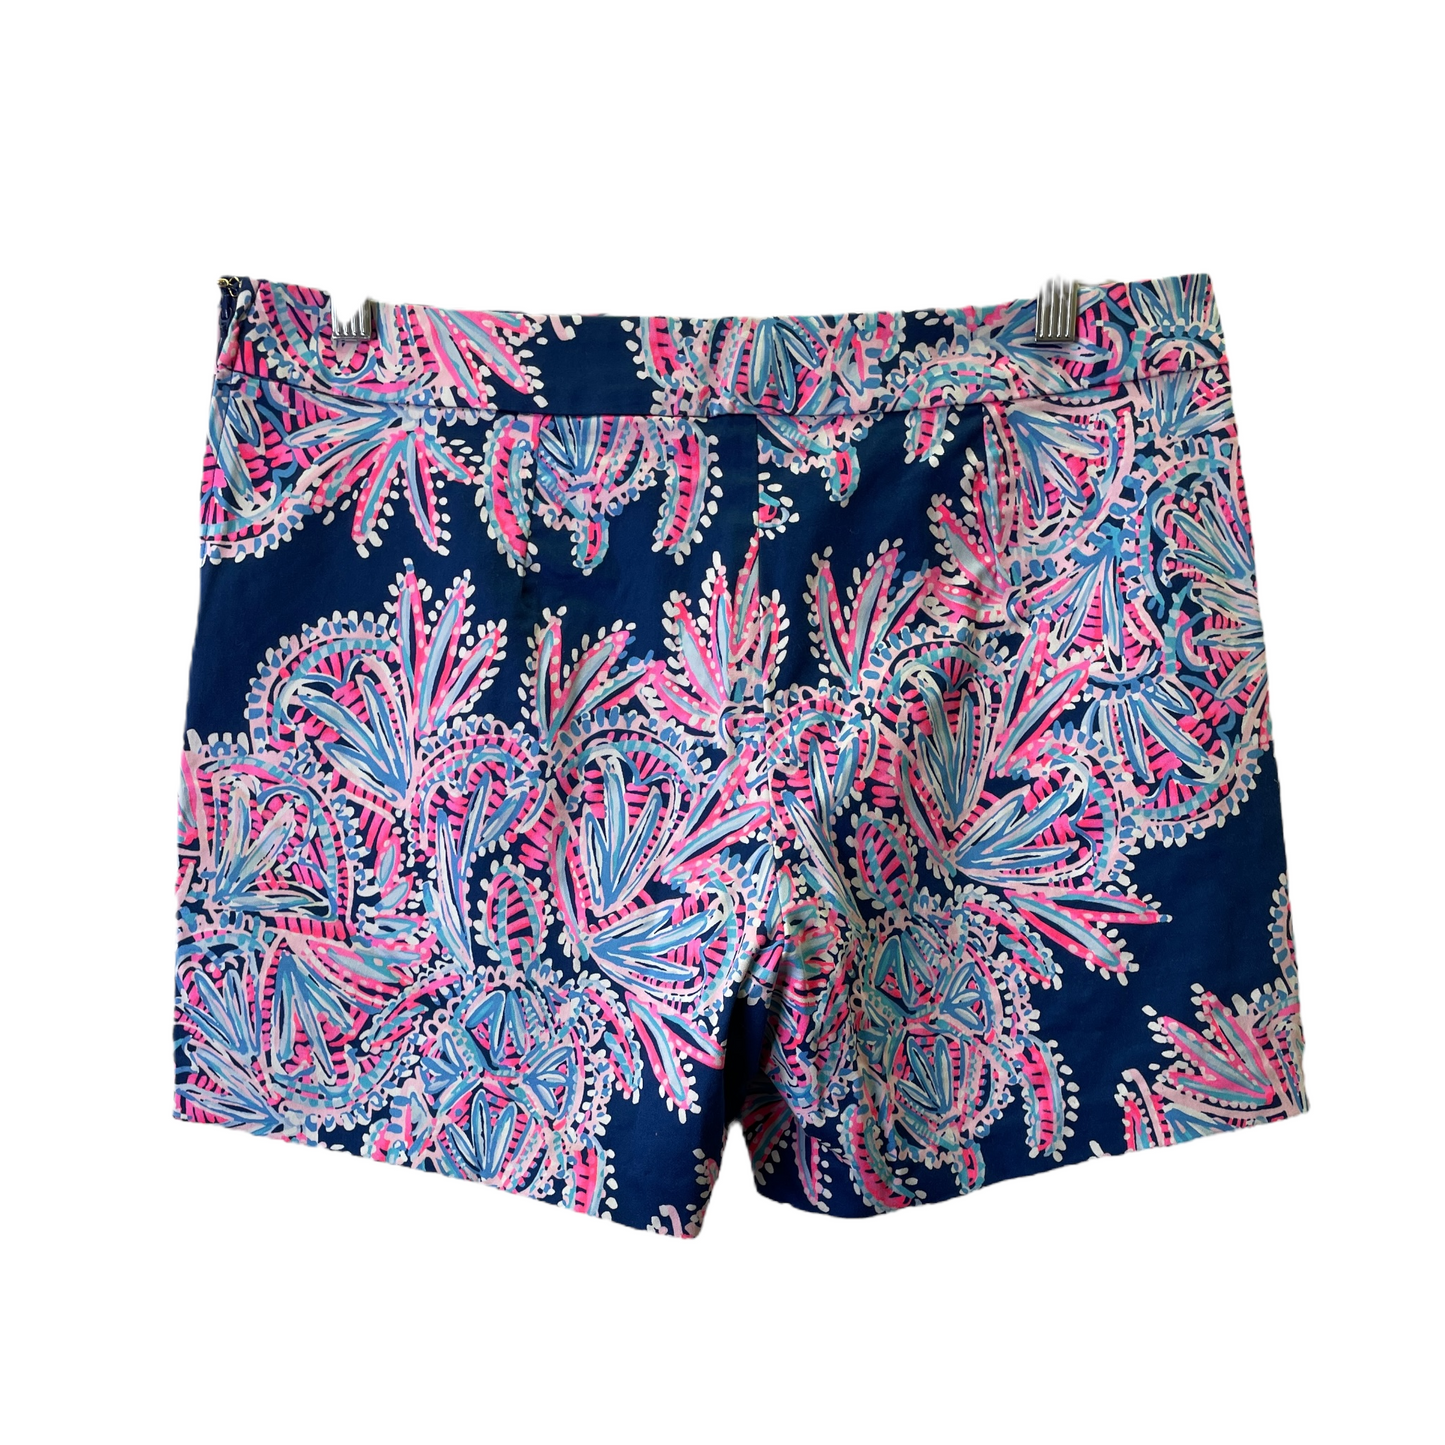 Blue Shorts By Lilly Pulitzer, Size: 8